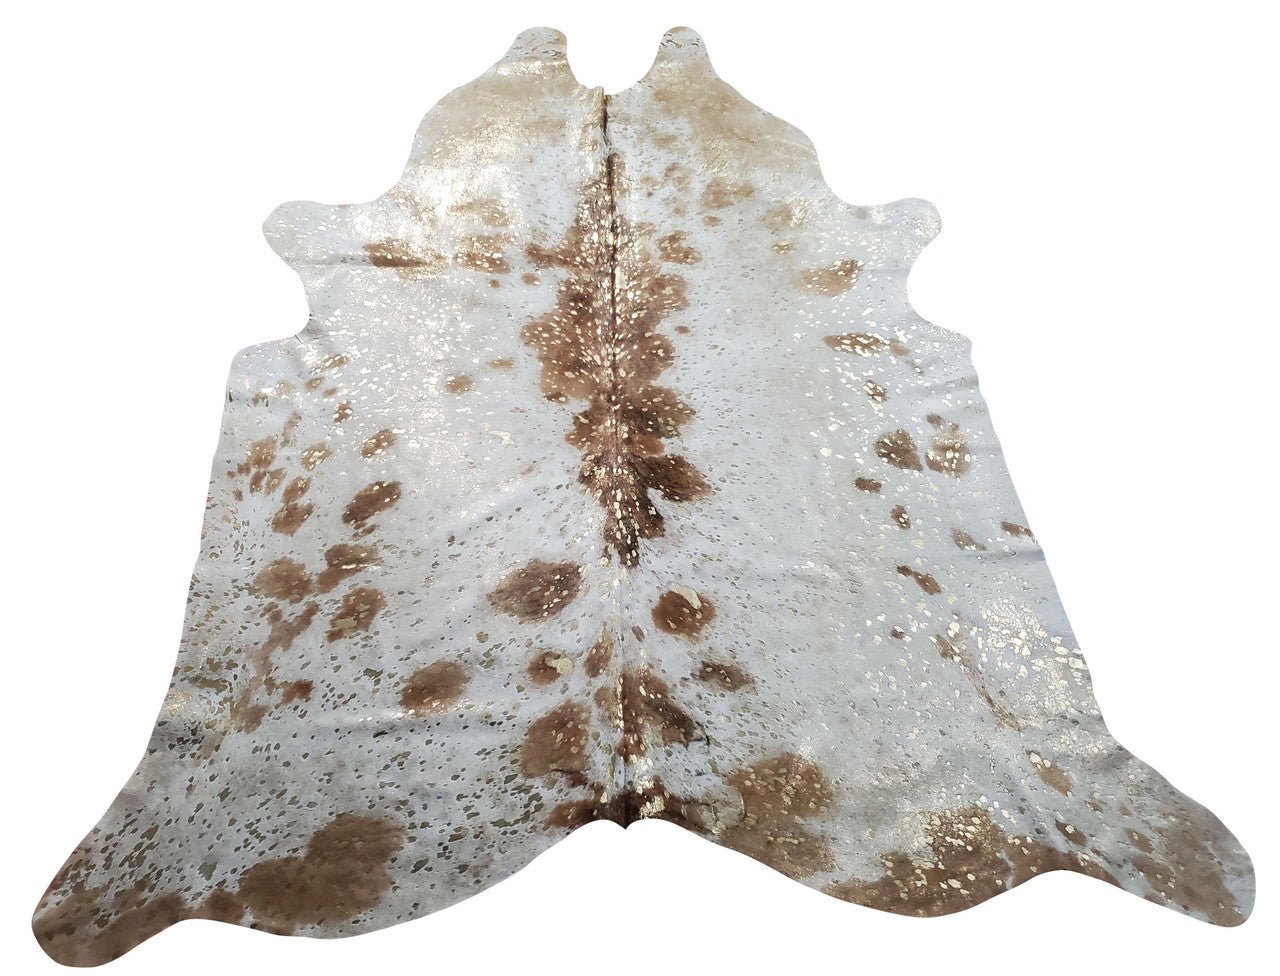 A stunning metallic cowhide rug that will make your room look more cosiers and welcoming, these full hides are one of a kind.
